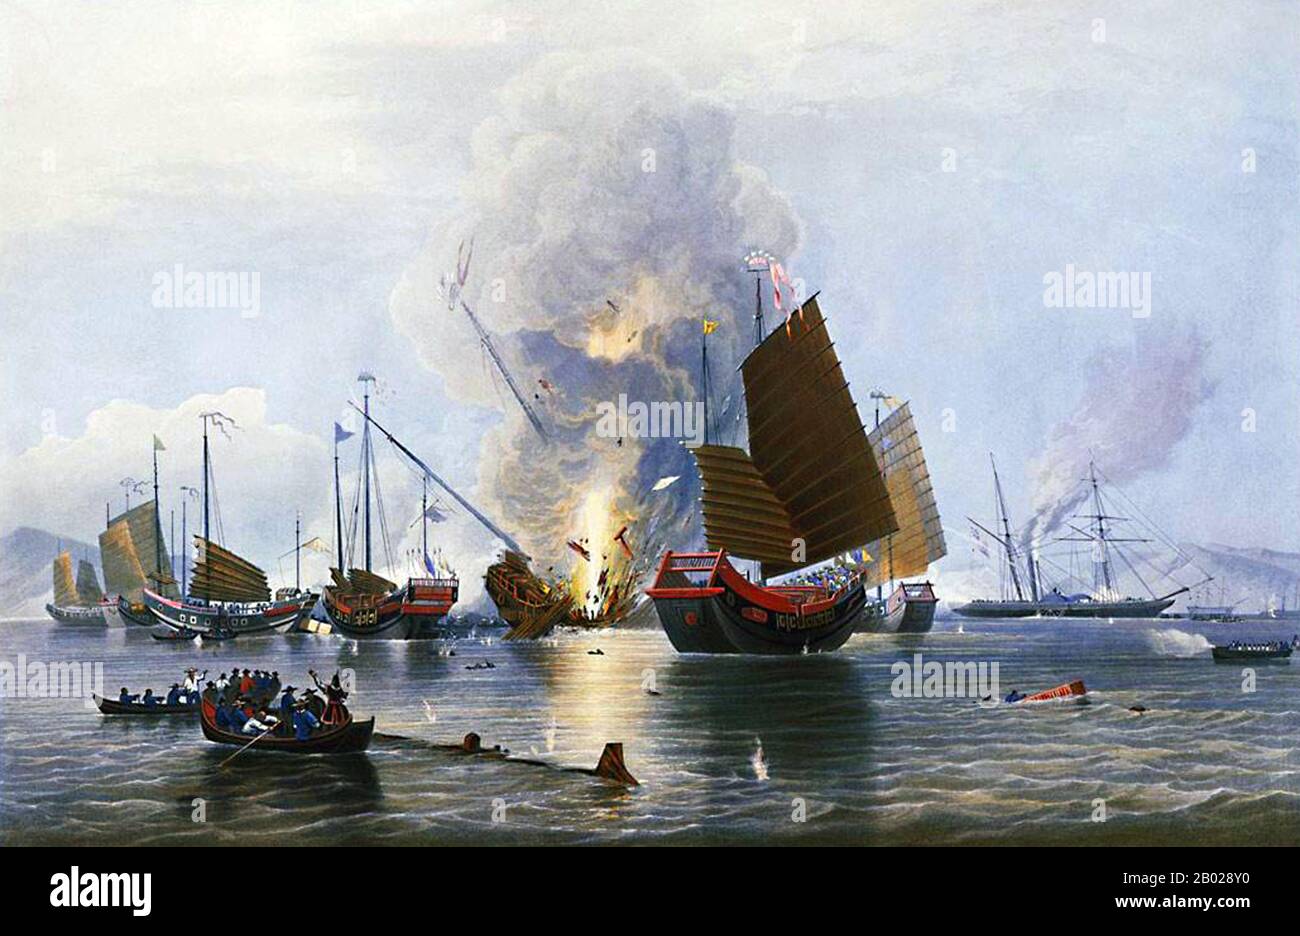 The Second Battle of Chuenpee was fought between British and Chinese forces at the Bocca Tigris, China, on 7 January 1841 during the First Opium War. The British captured the forts on the islands of Chuenpee and Tycocktow.  The battle led to negotiations between British Plenipotentiary Charles Elliot and Chinese Imperial Commissioner Qishan in the Convention of Chuenpee. Elliot declared, among other arrangements, the cession of Hong Kong Island to the British Empire.  During the battle, the iron steam ship Nemesis fired a congreve rocket which exploded a Chinese junk. A British officer gave hi Stock Photo